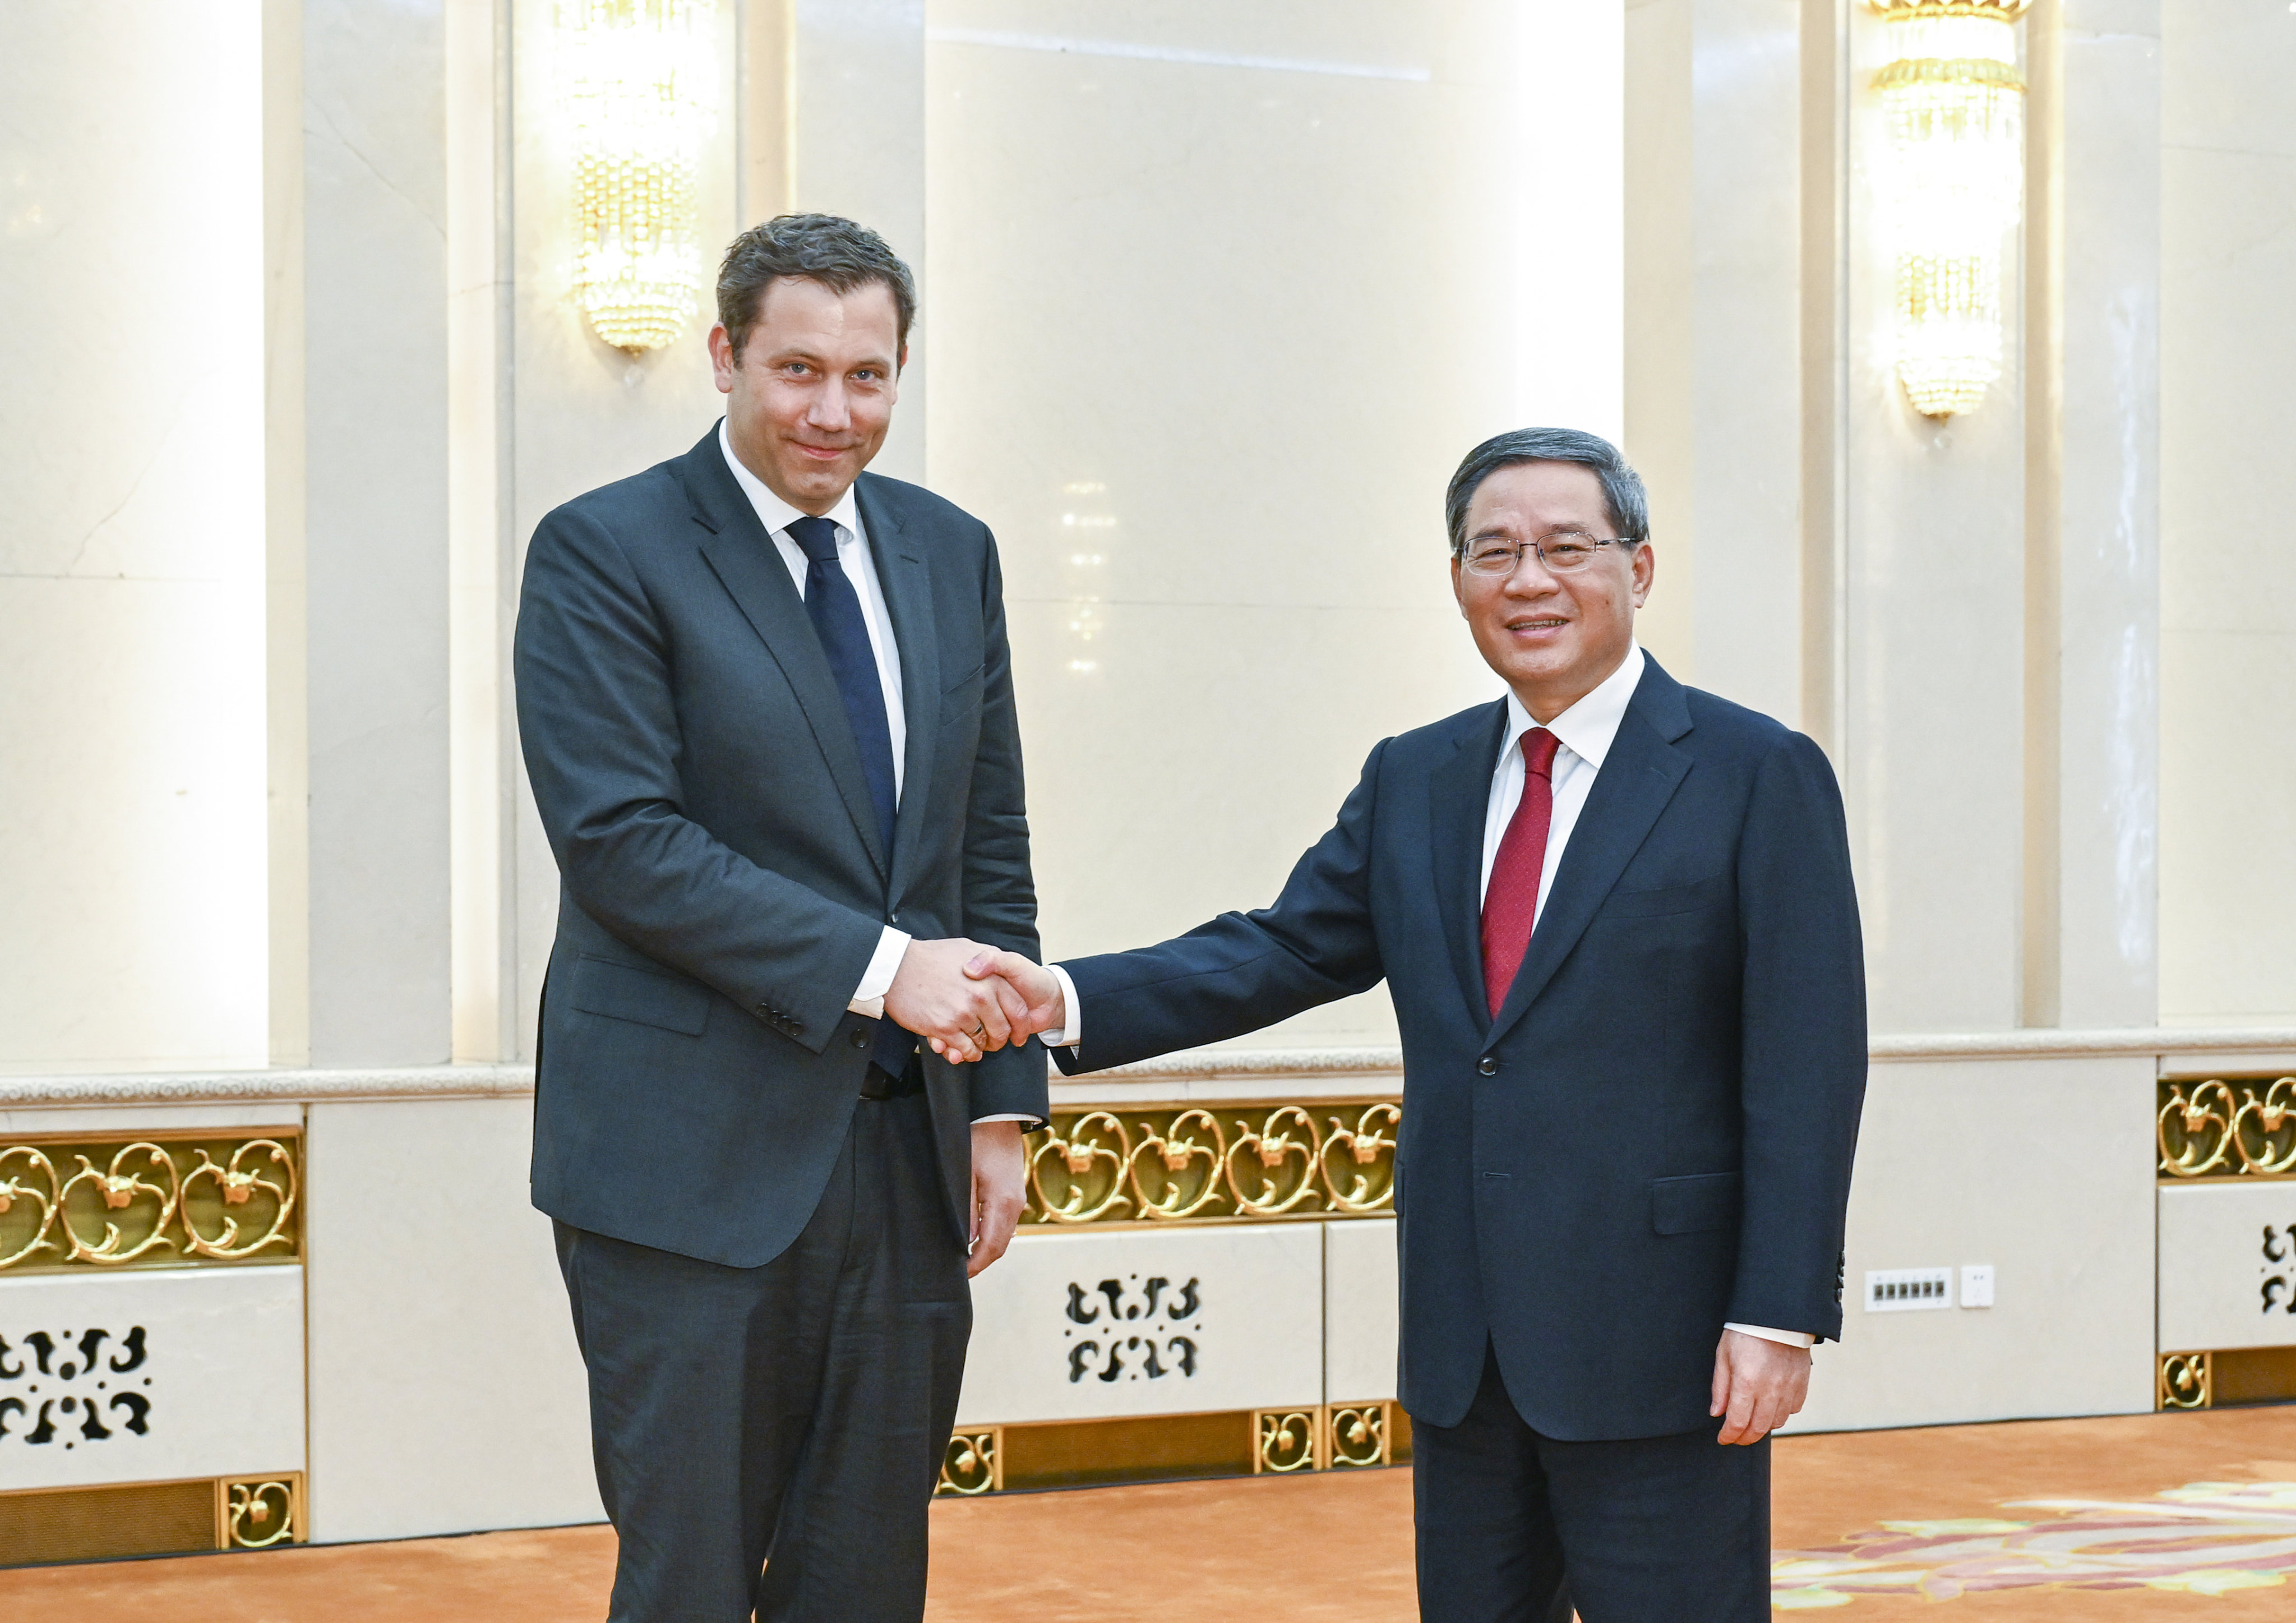 Chinese Premier Li Qiang meets a delegation of the German Social Democratic Party (SPD), led by Lars Klingbeil, the head of the SPD, at the Great Hall of the People in Beijing on Monday, June 5, 2023. Photo: Xinhua